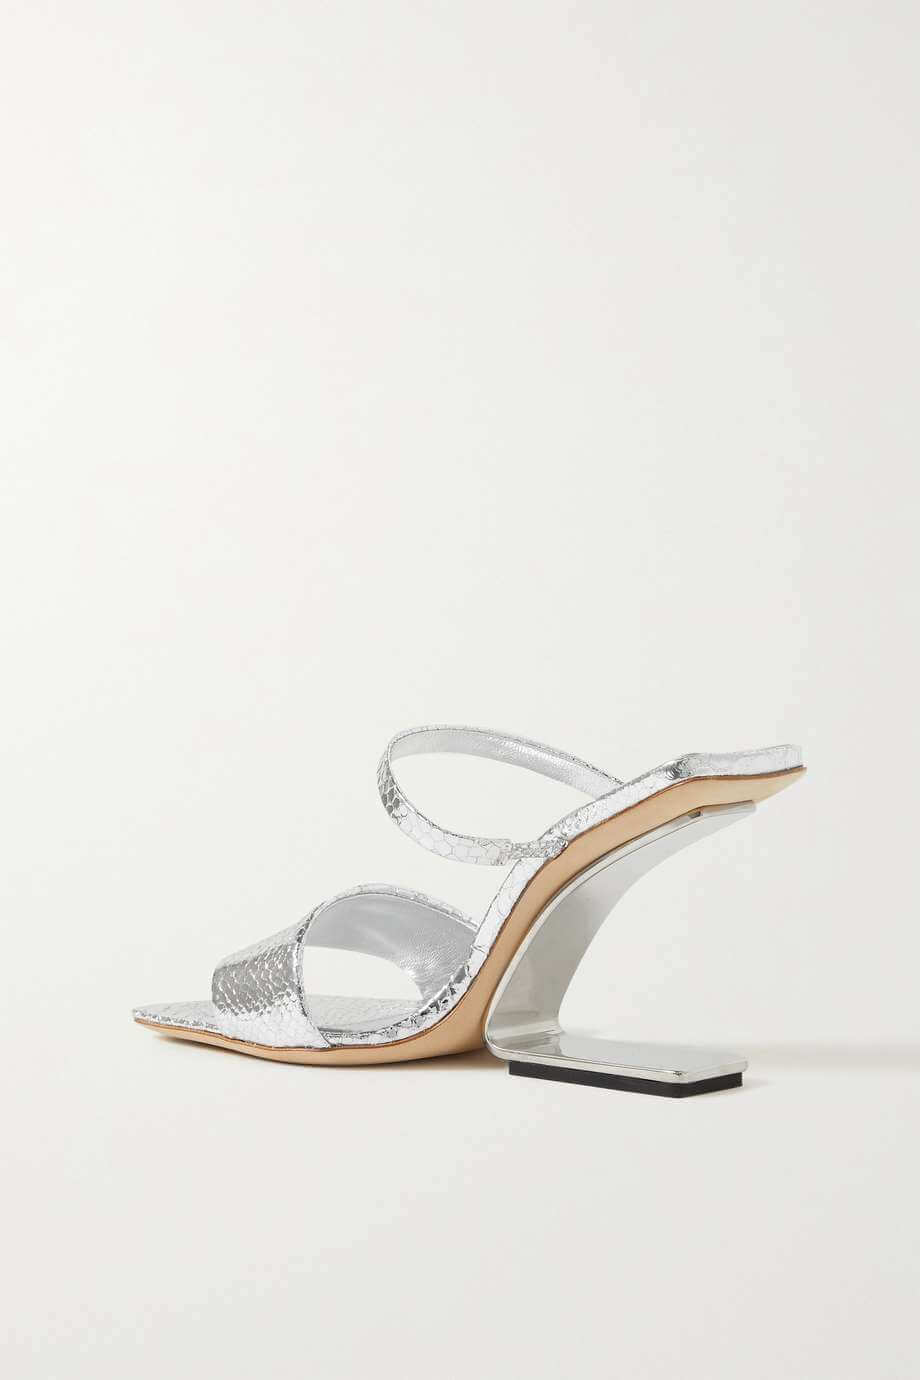 Cult Gaia Rene Sandal in Silver available at TNT The New Trend Australia.